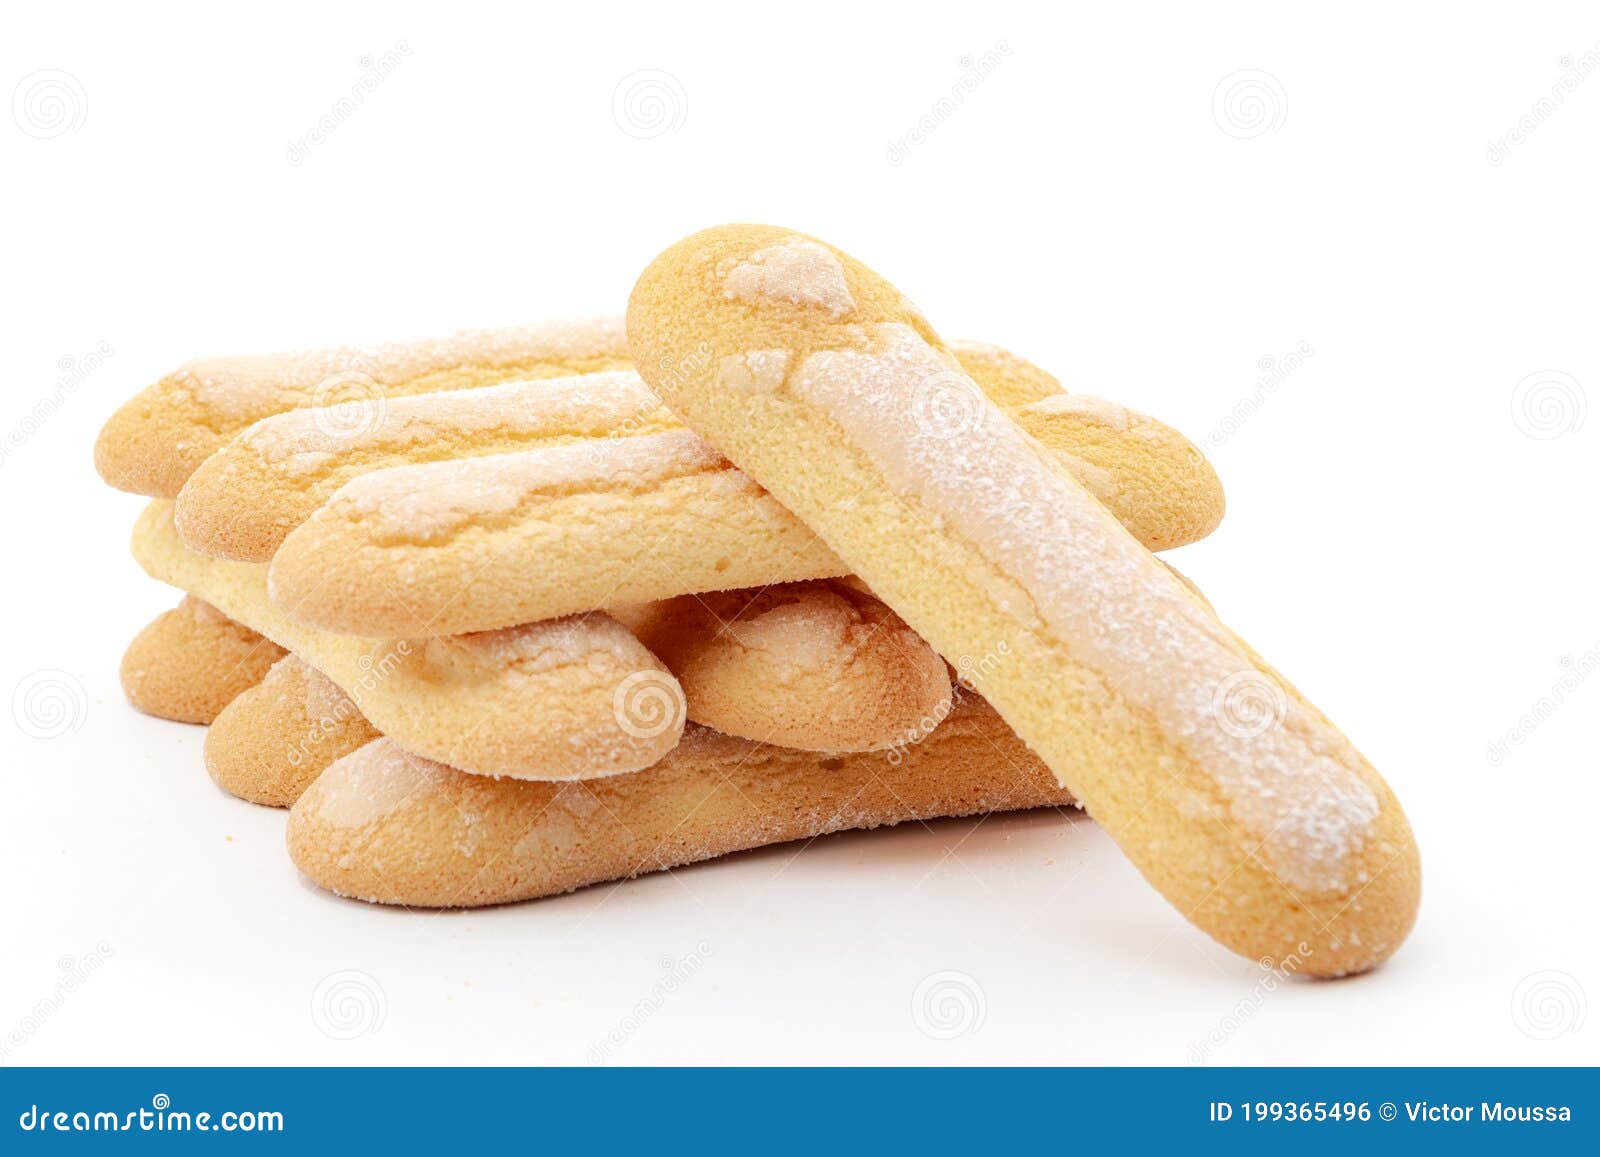 italian desserts and sponge cookies concept with lady fingers or savoiardi biscuit  on white background